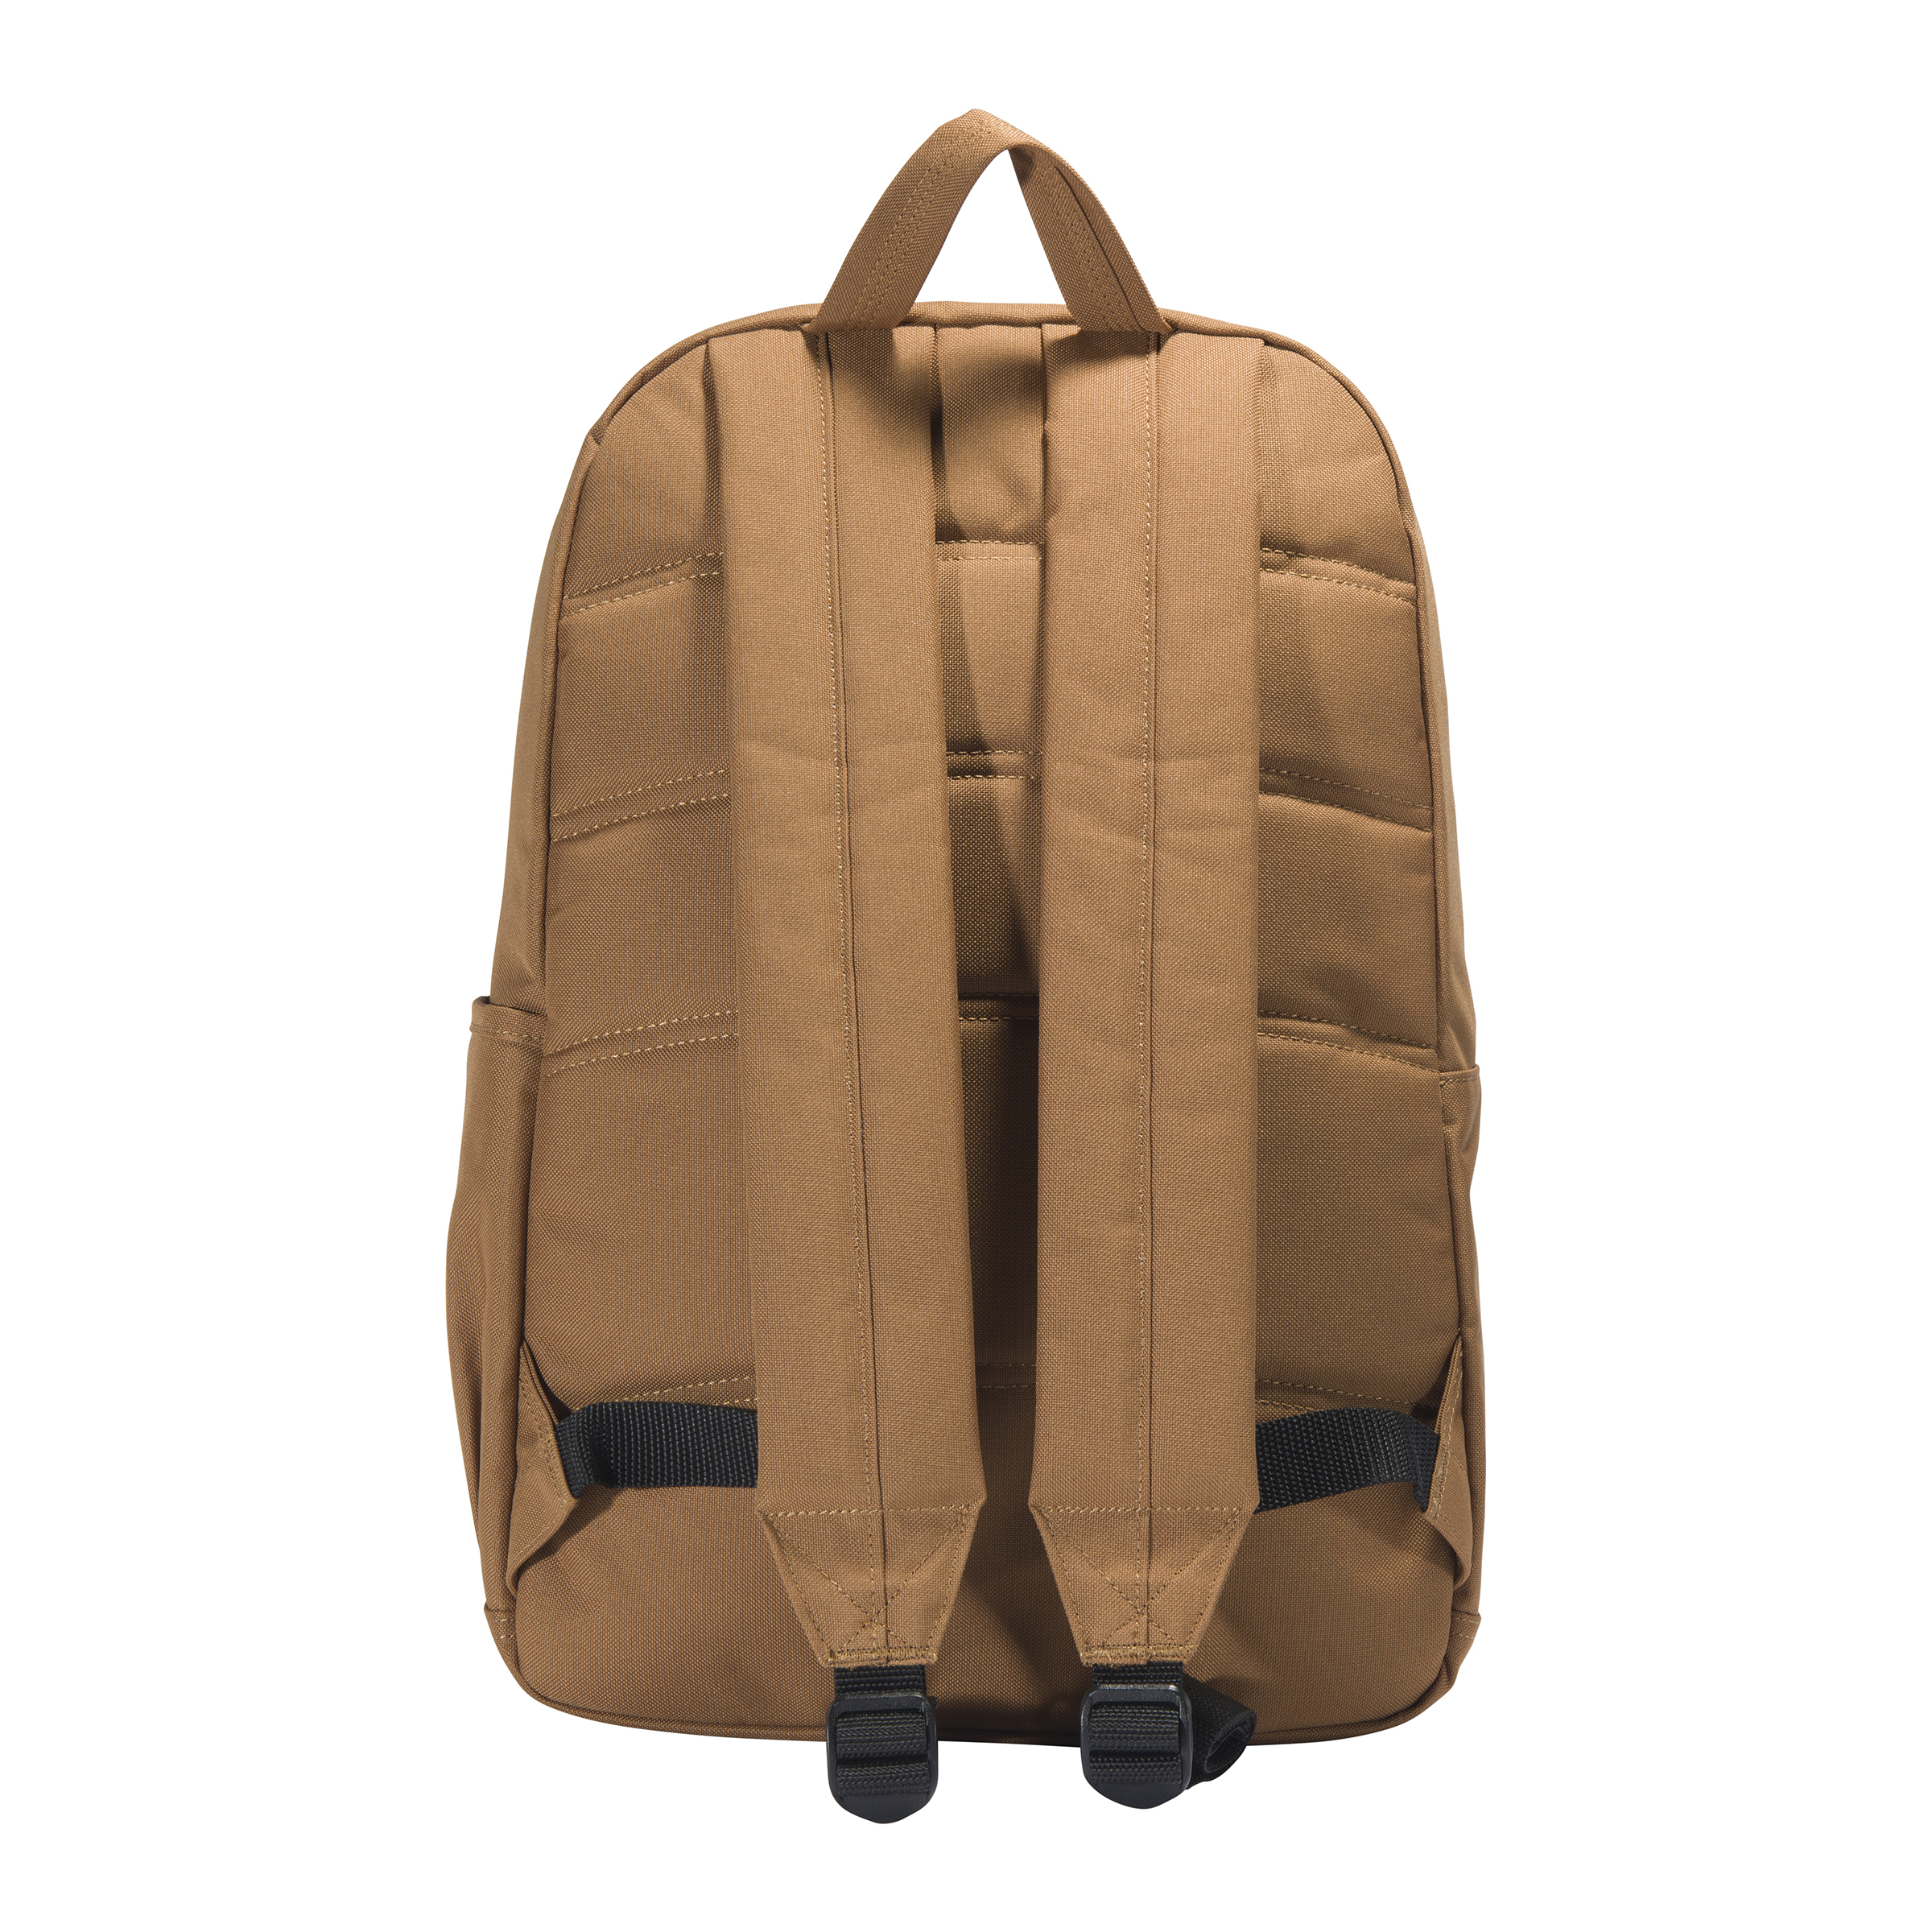 Picture of Carhartt B0000280 Mens 21L Classic Backpack